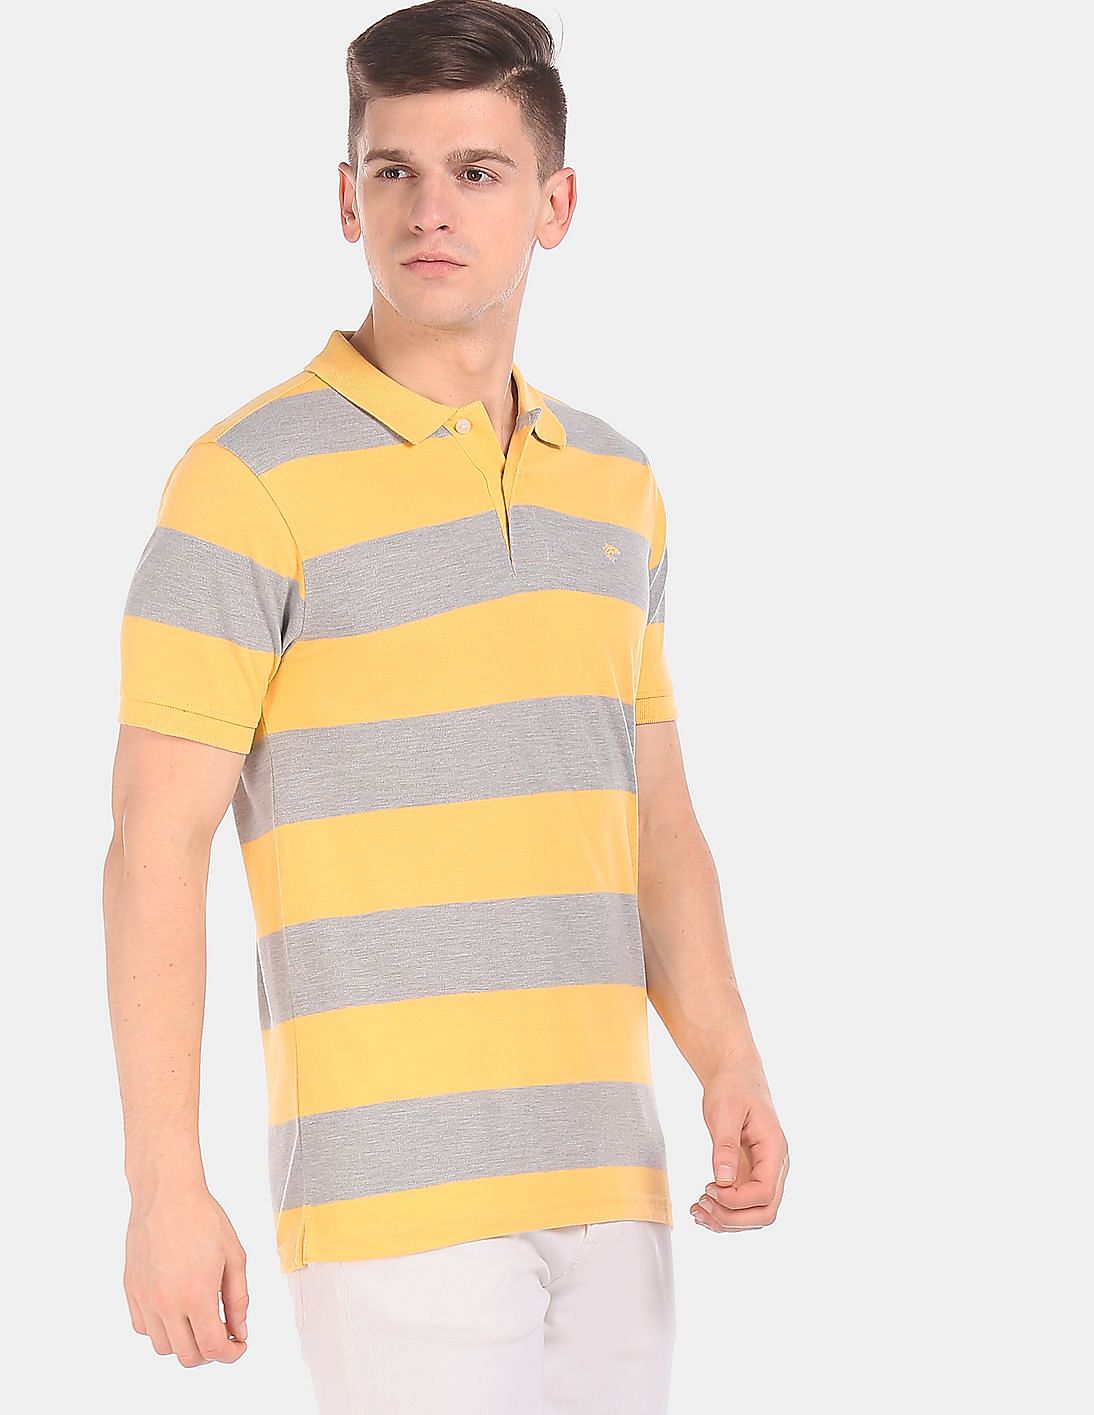 Buy Ruggers Men Yellow And Grey Short Sleeve Striped Polo Shirt - NNNOW.com